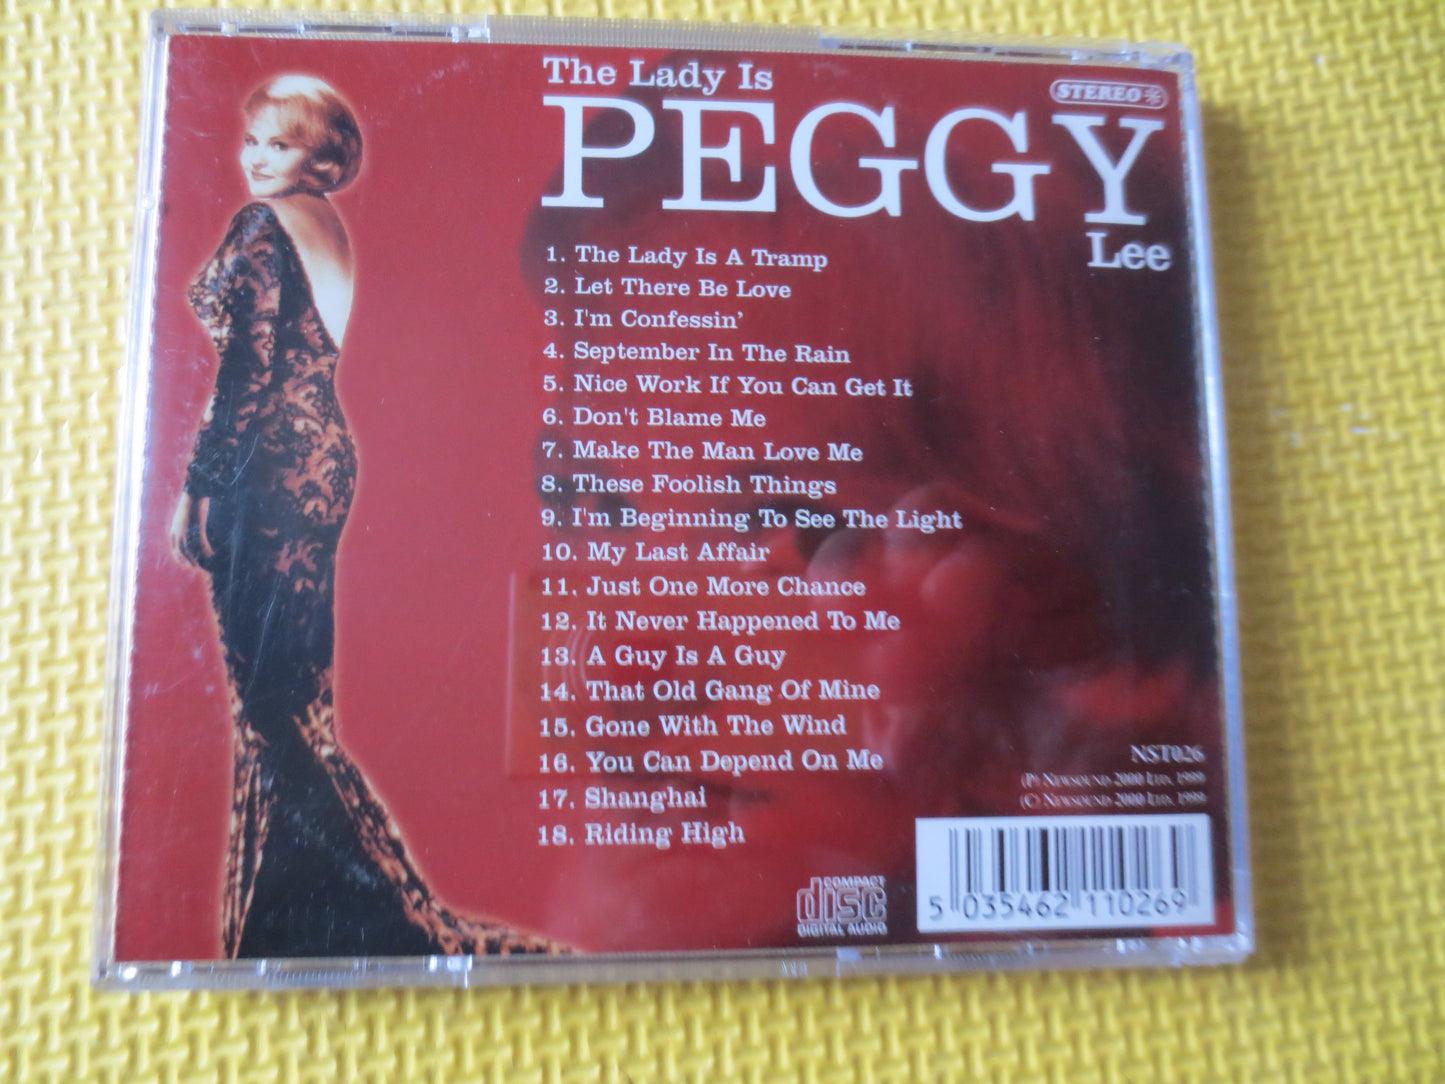 PEGGY LEE, The Lady is Peggy Lee, Peggy Lee Cd, Jazz Cd, Jazz Music Cd, Peggy Lee Lp, Music Cd, Vocal Cds, Compact Disc Music